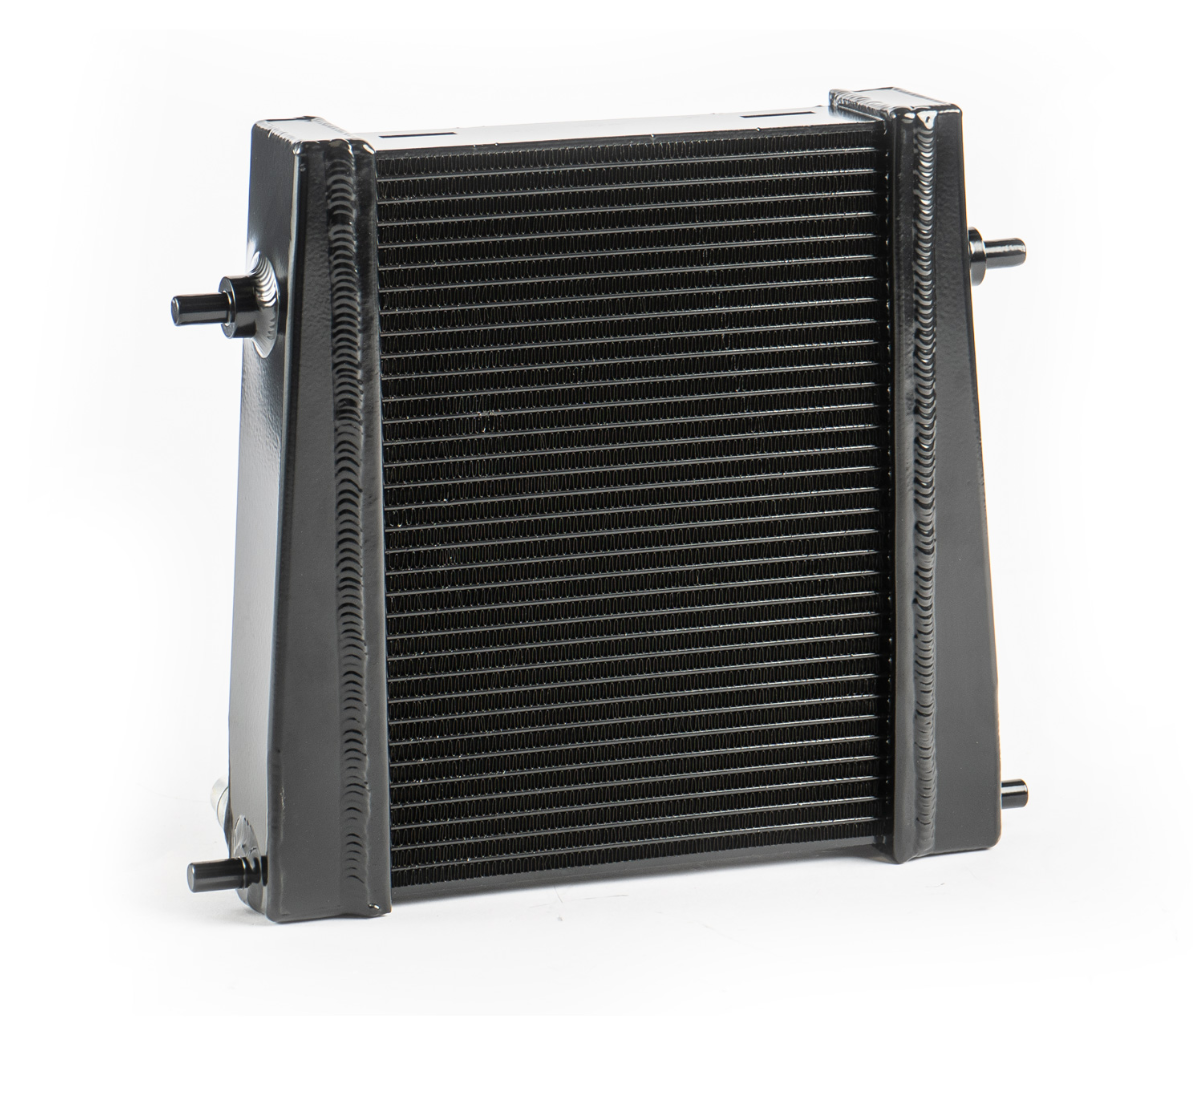 CTS Turbo DSG Cooler/Auxiliary Radiator - BMW G20/G29 M340i/M440i/Z4 M40i and Toyota A90/A91 Supra